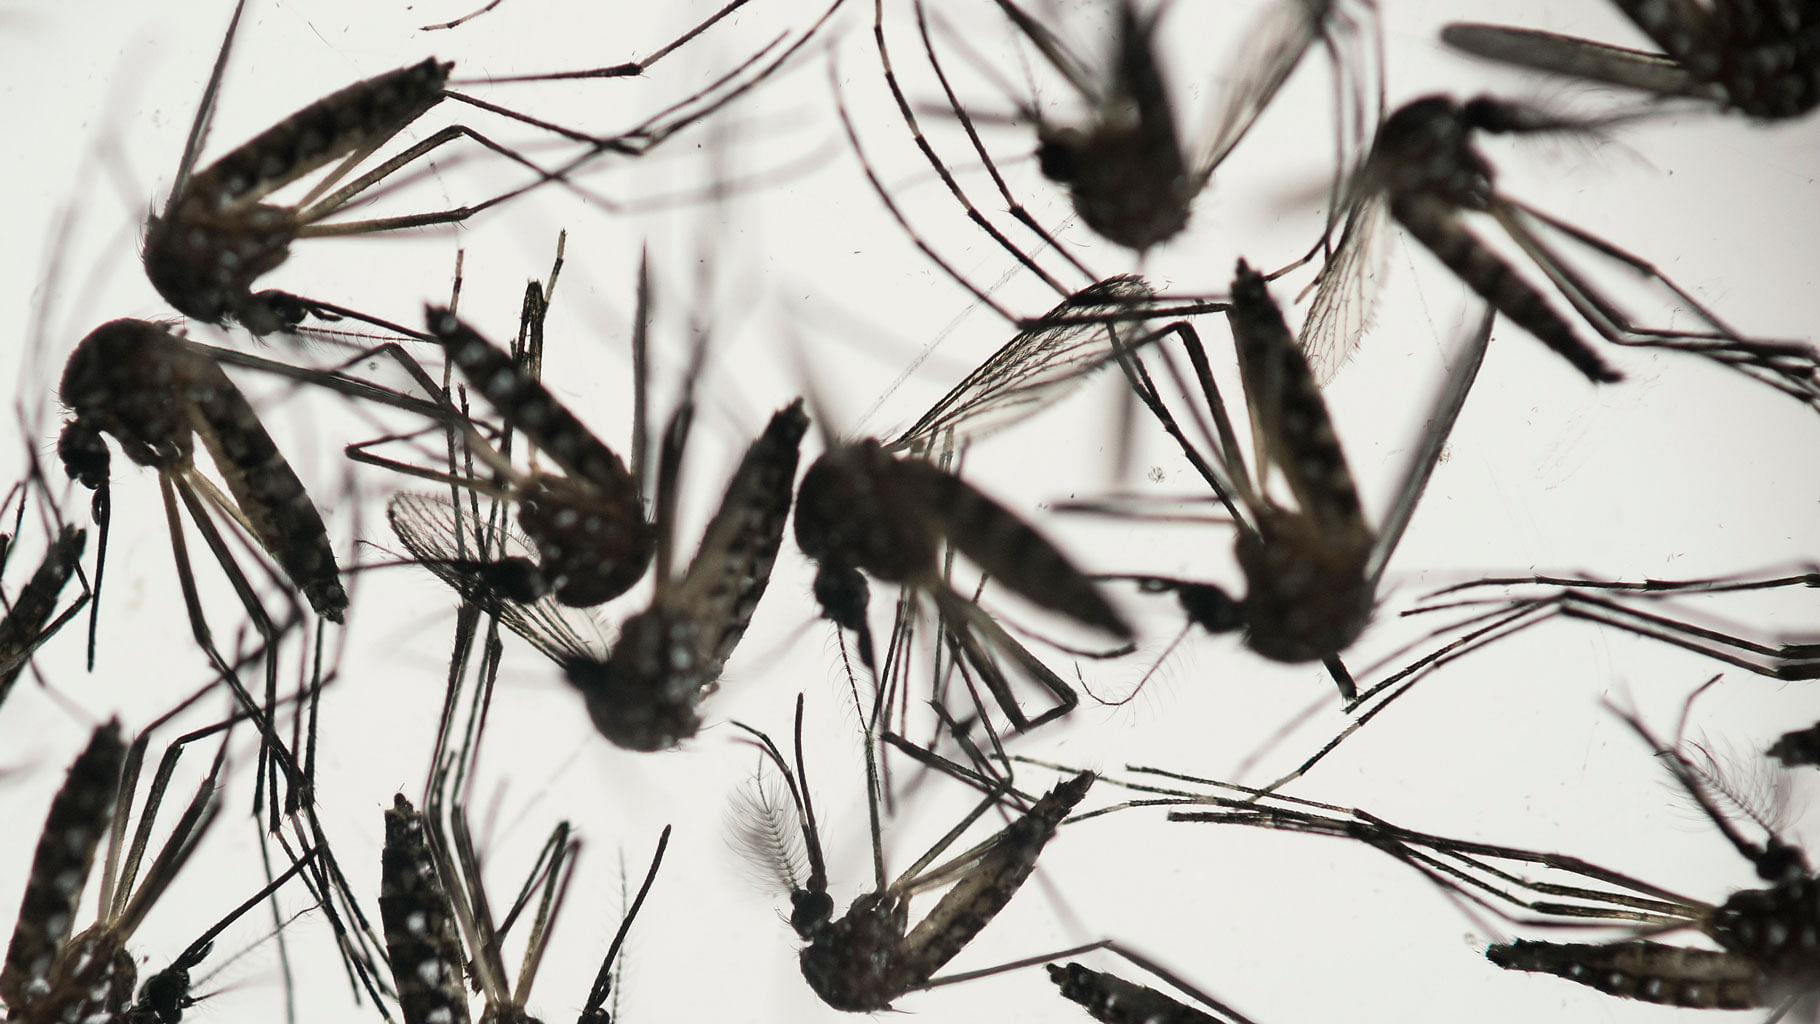 The first known case of Zika virus transmission in the United States is reported in Texas by local health officials. (Photo: AP)